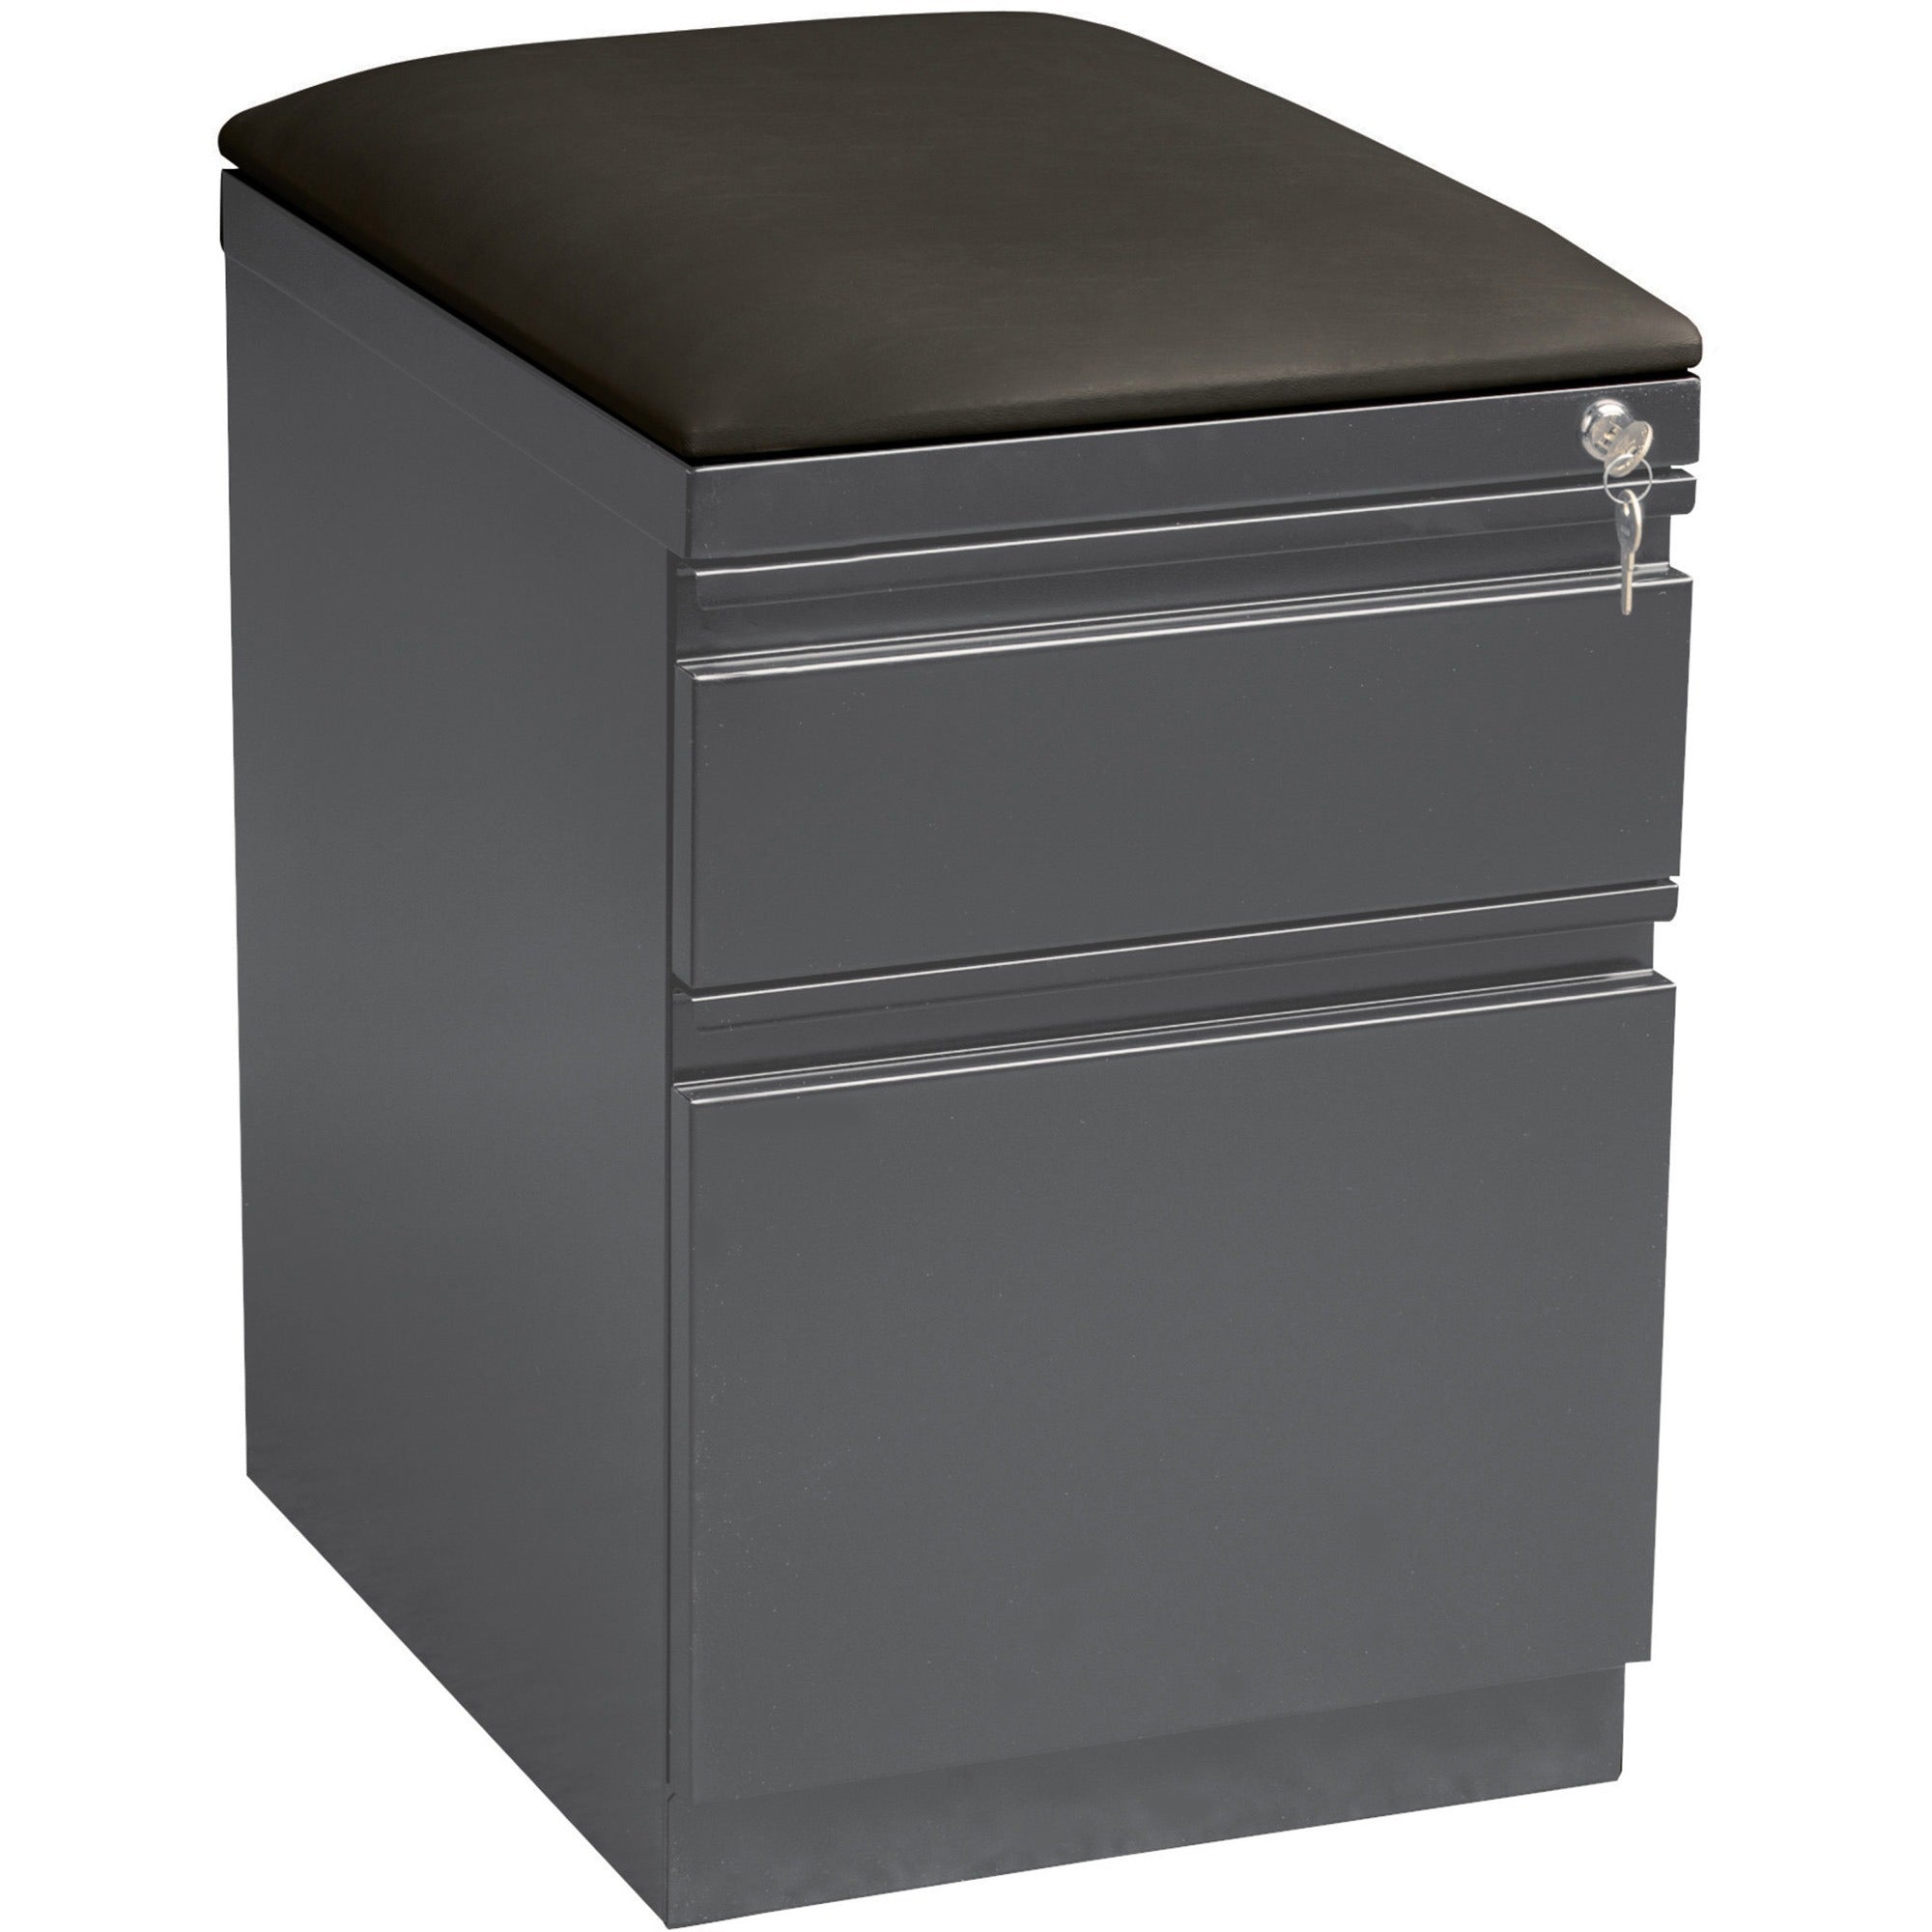 Lorell Mobile File Cabinet with Seat Cushion Top - 19.9" x 23.8" - 2 x Drawer(s) for File, Box - Letter - Mobility, Drawer Extension, Ball-bearing Suspension, Security Lock, Casters - Charcoal - Steel - Recycled - Assembly Required - 